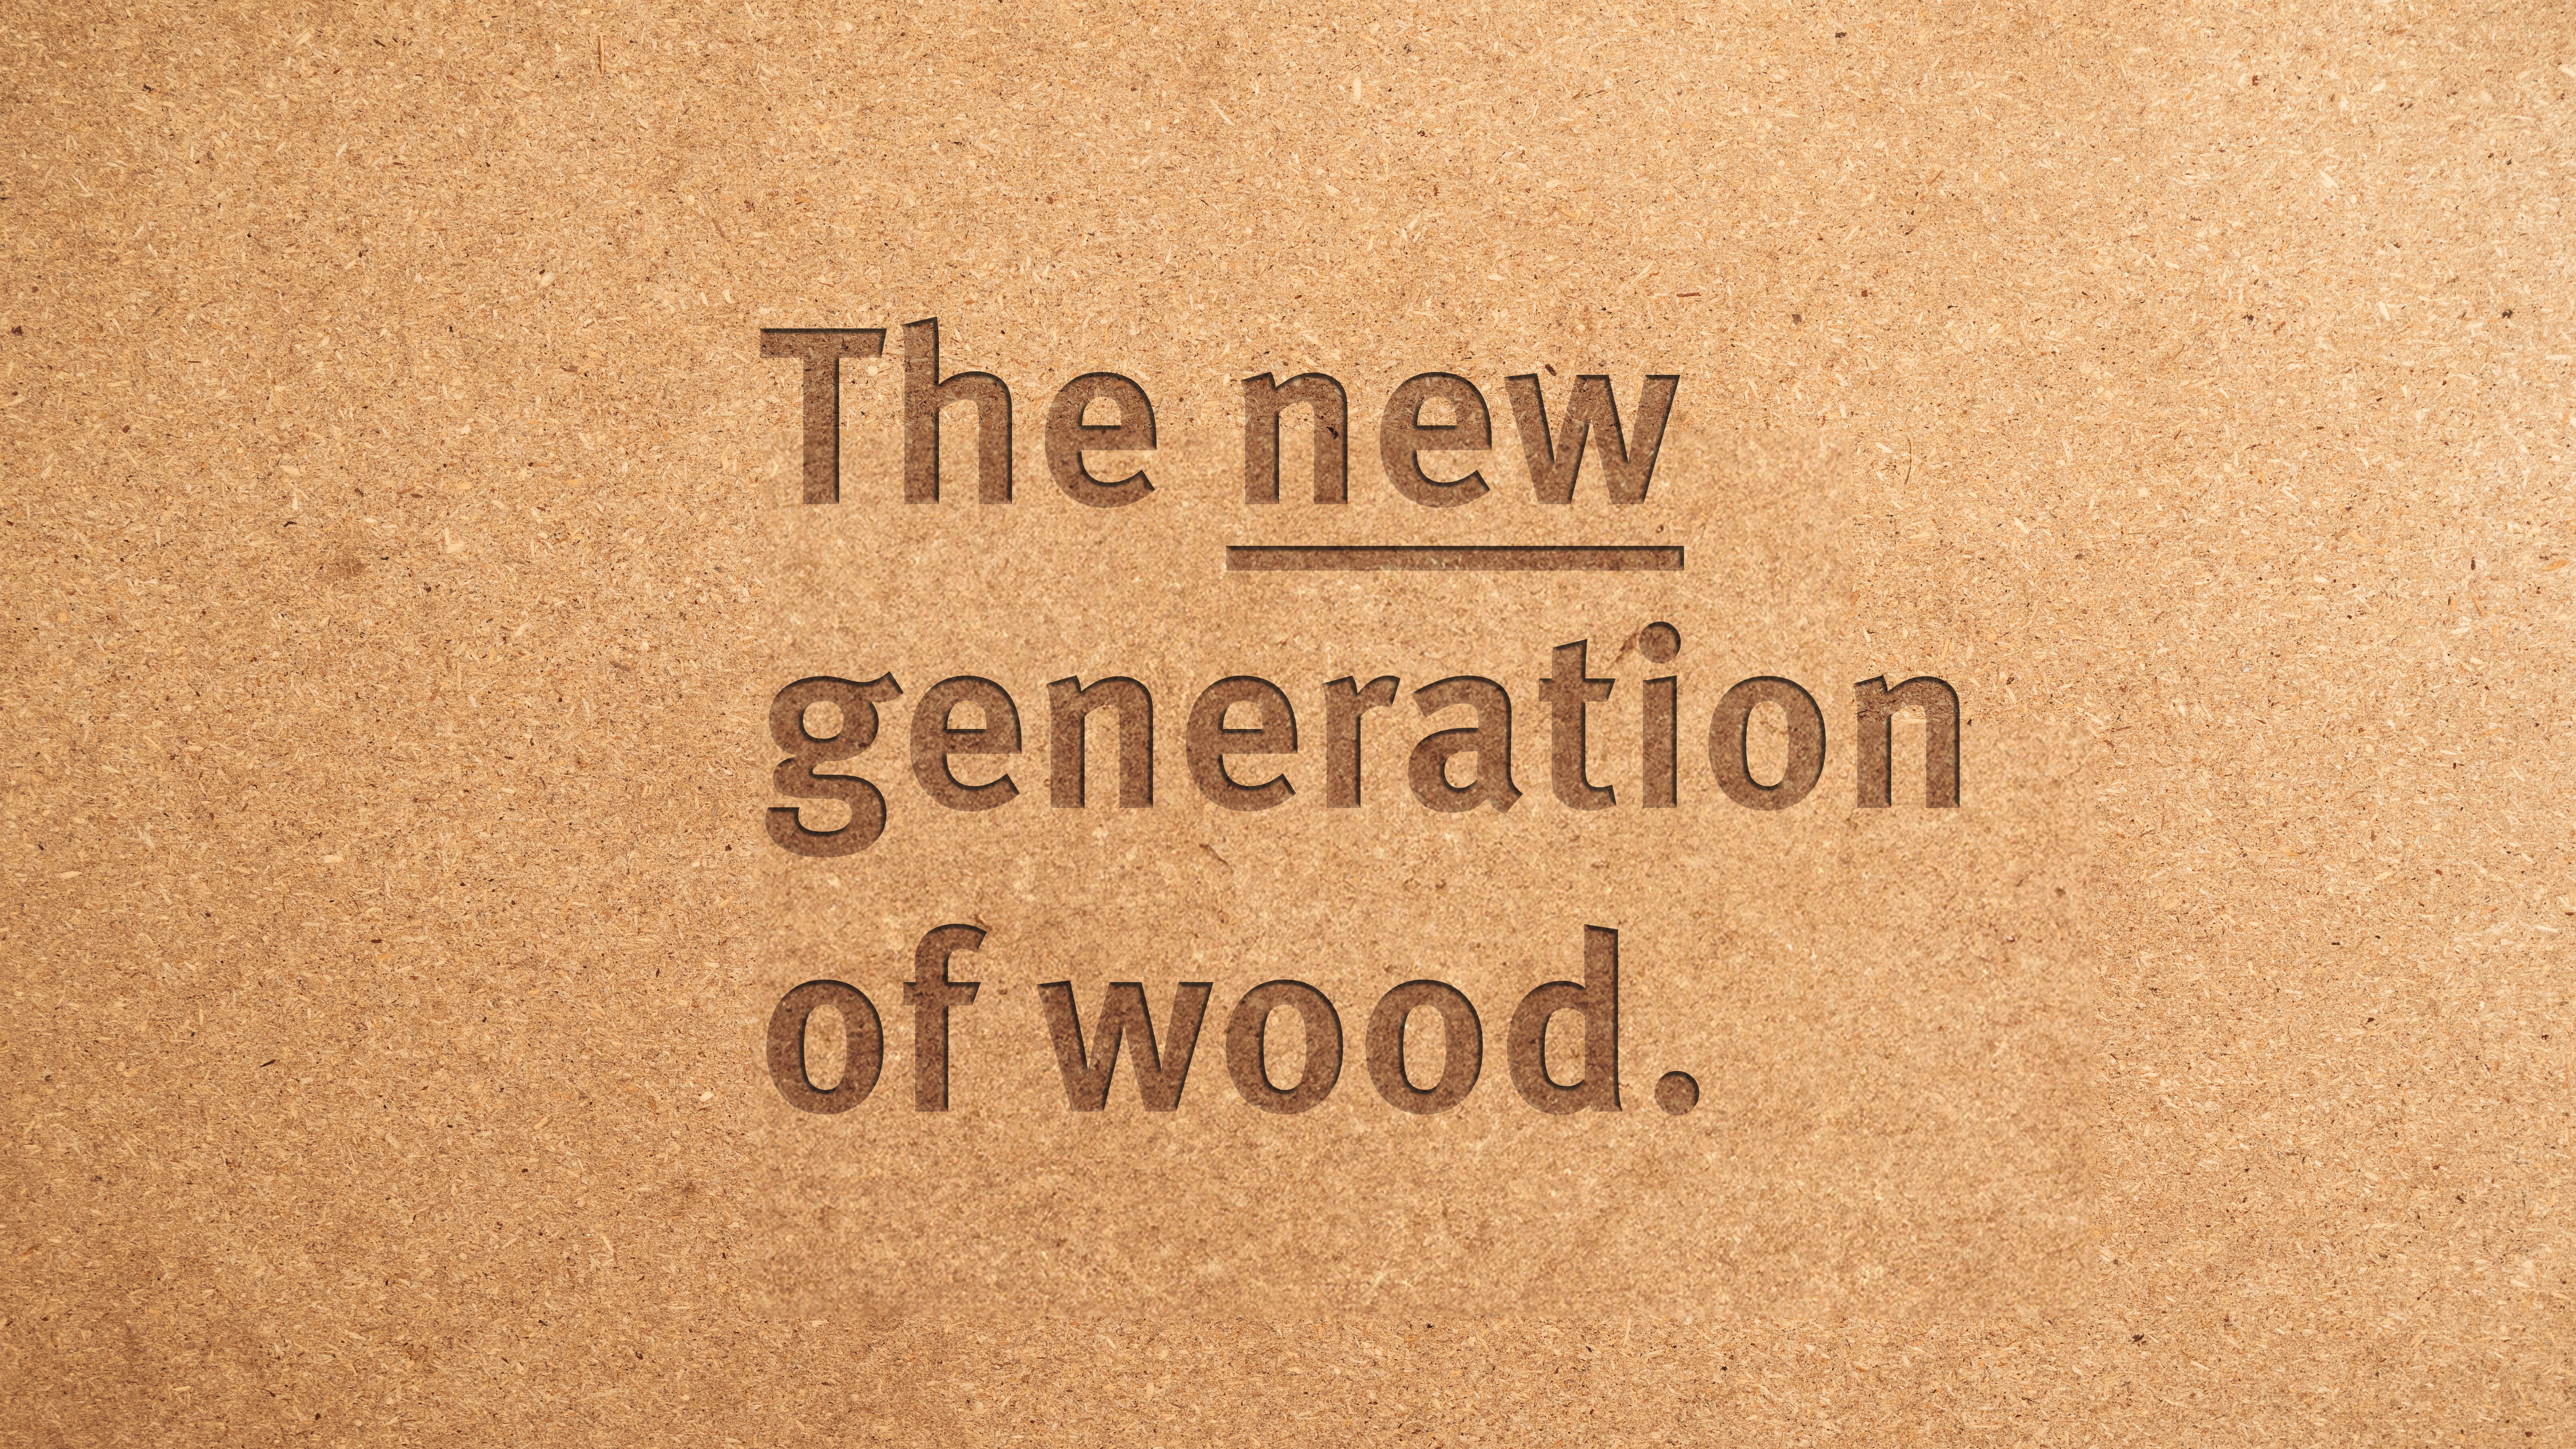 EGGER Chipboard - The new generation of wood.